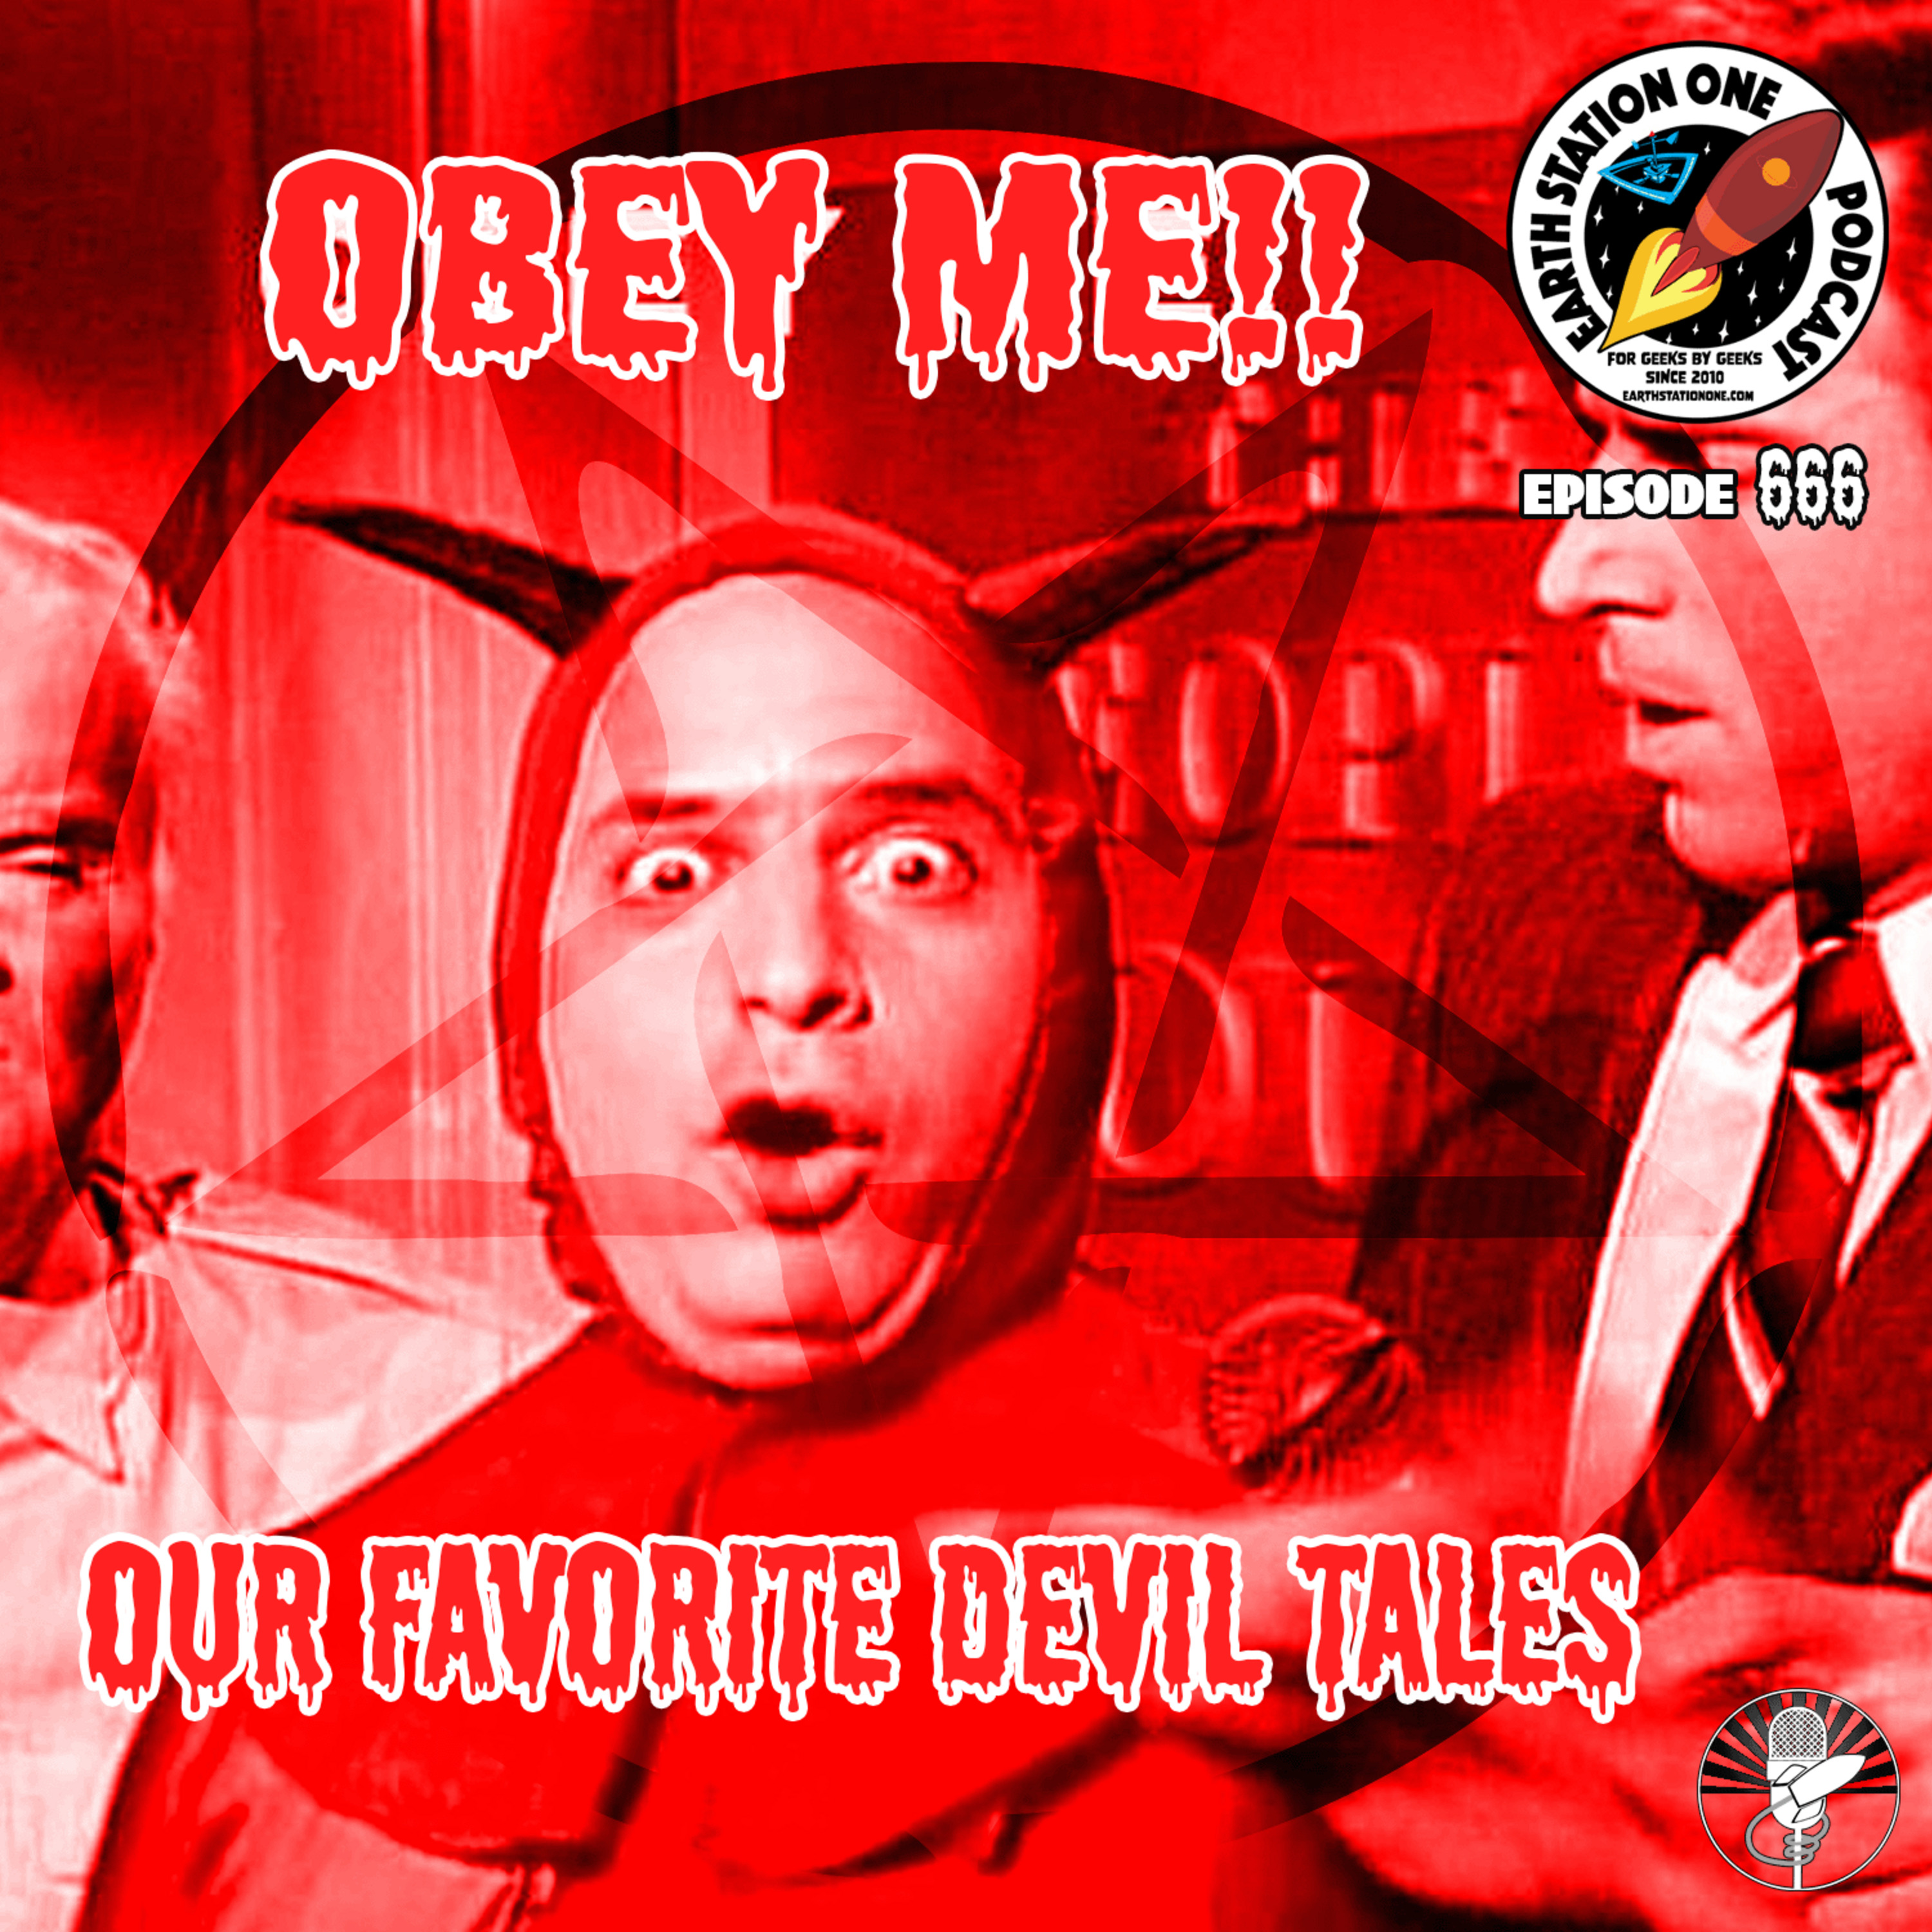 The Earth Station One Podcast - Our Favorite Devil Tales